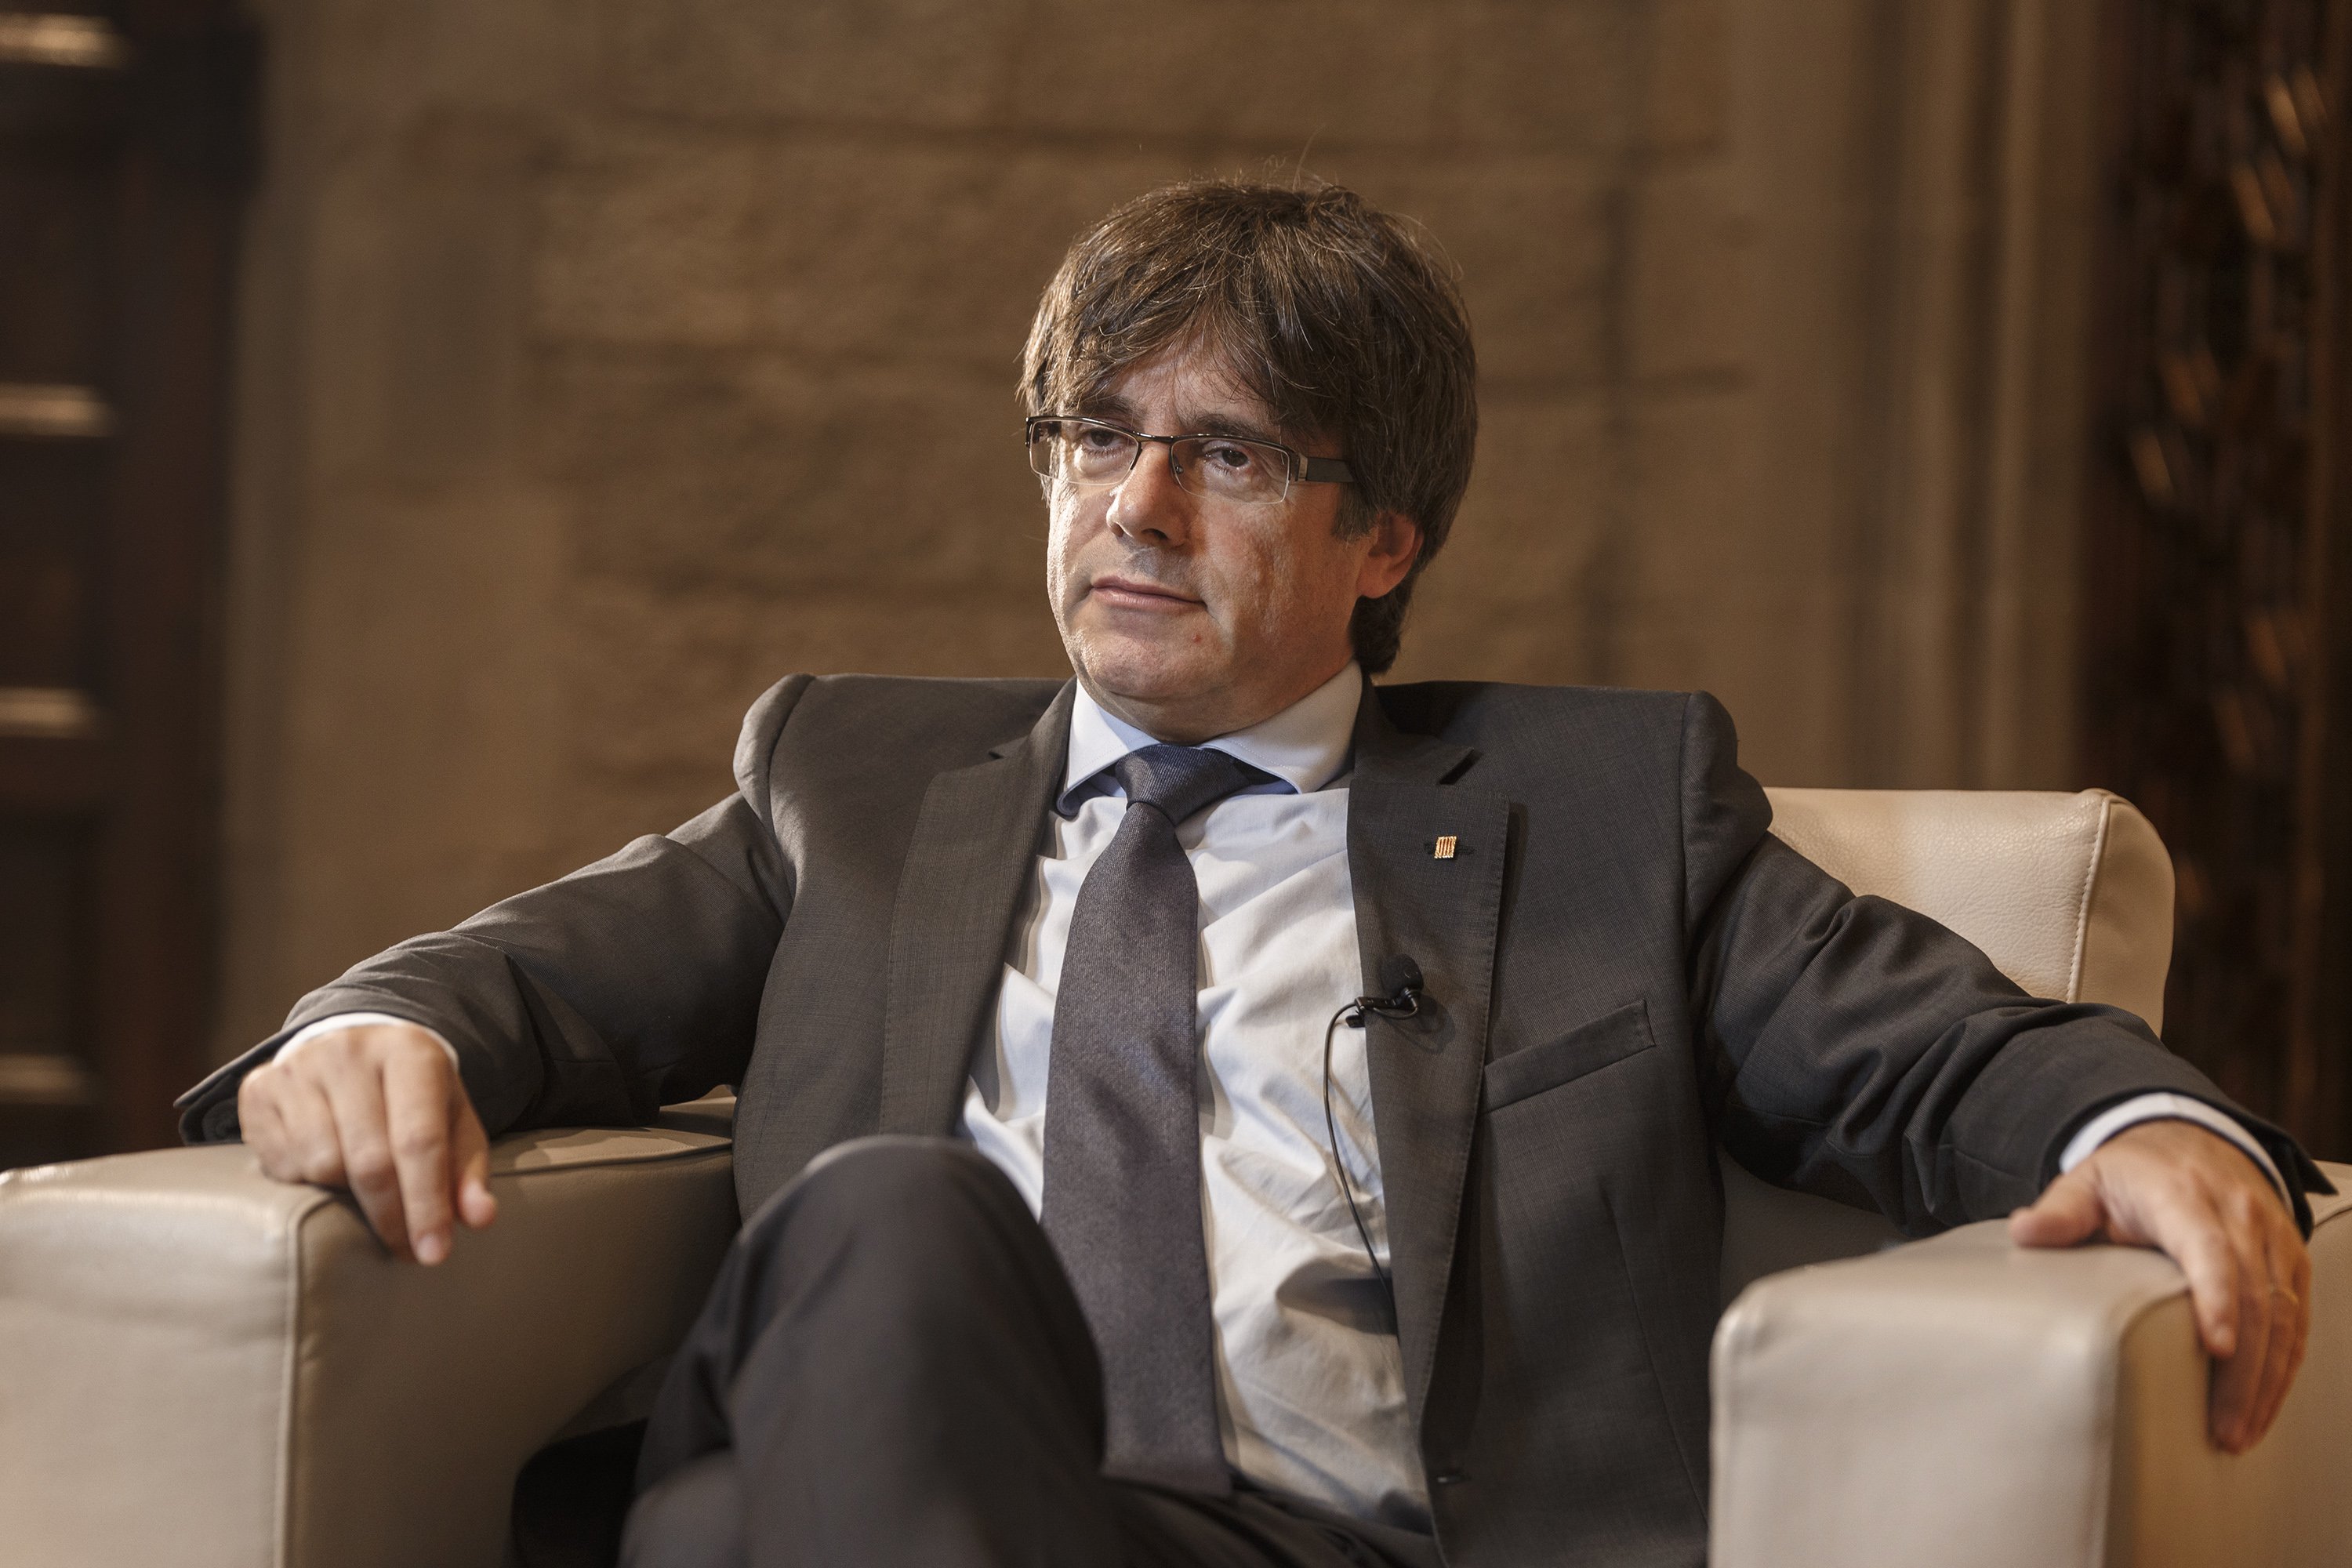 VIDEO: The interview with Puigdemont in 10 responses